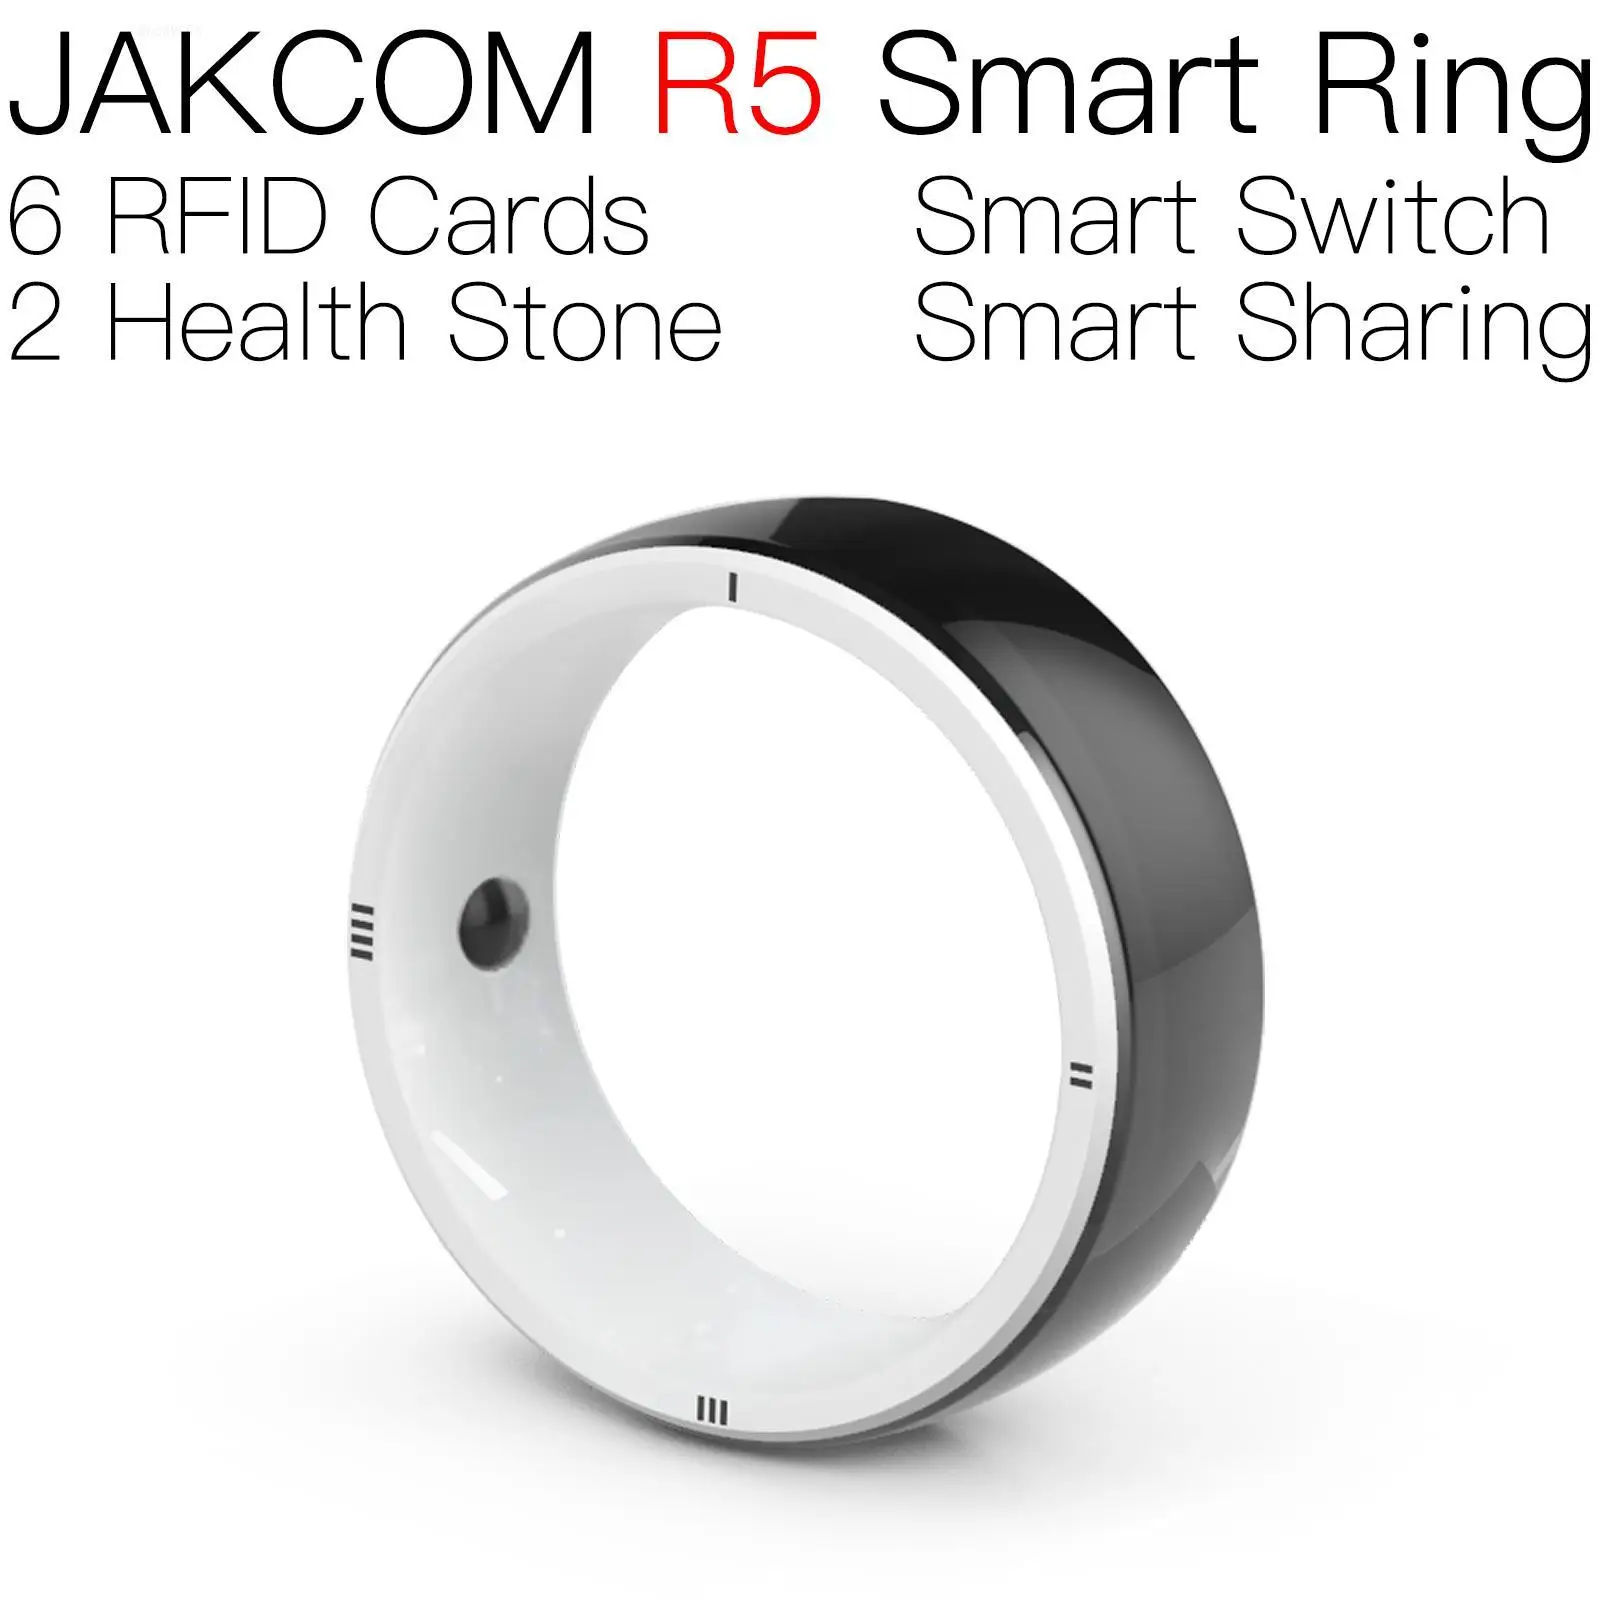 

JAKCOM R5 Smart Ring New arrival as galaxy watch 46mm android i7 max europe 1 year abonnement smart whas smartlife